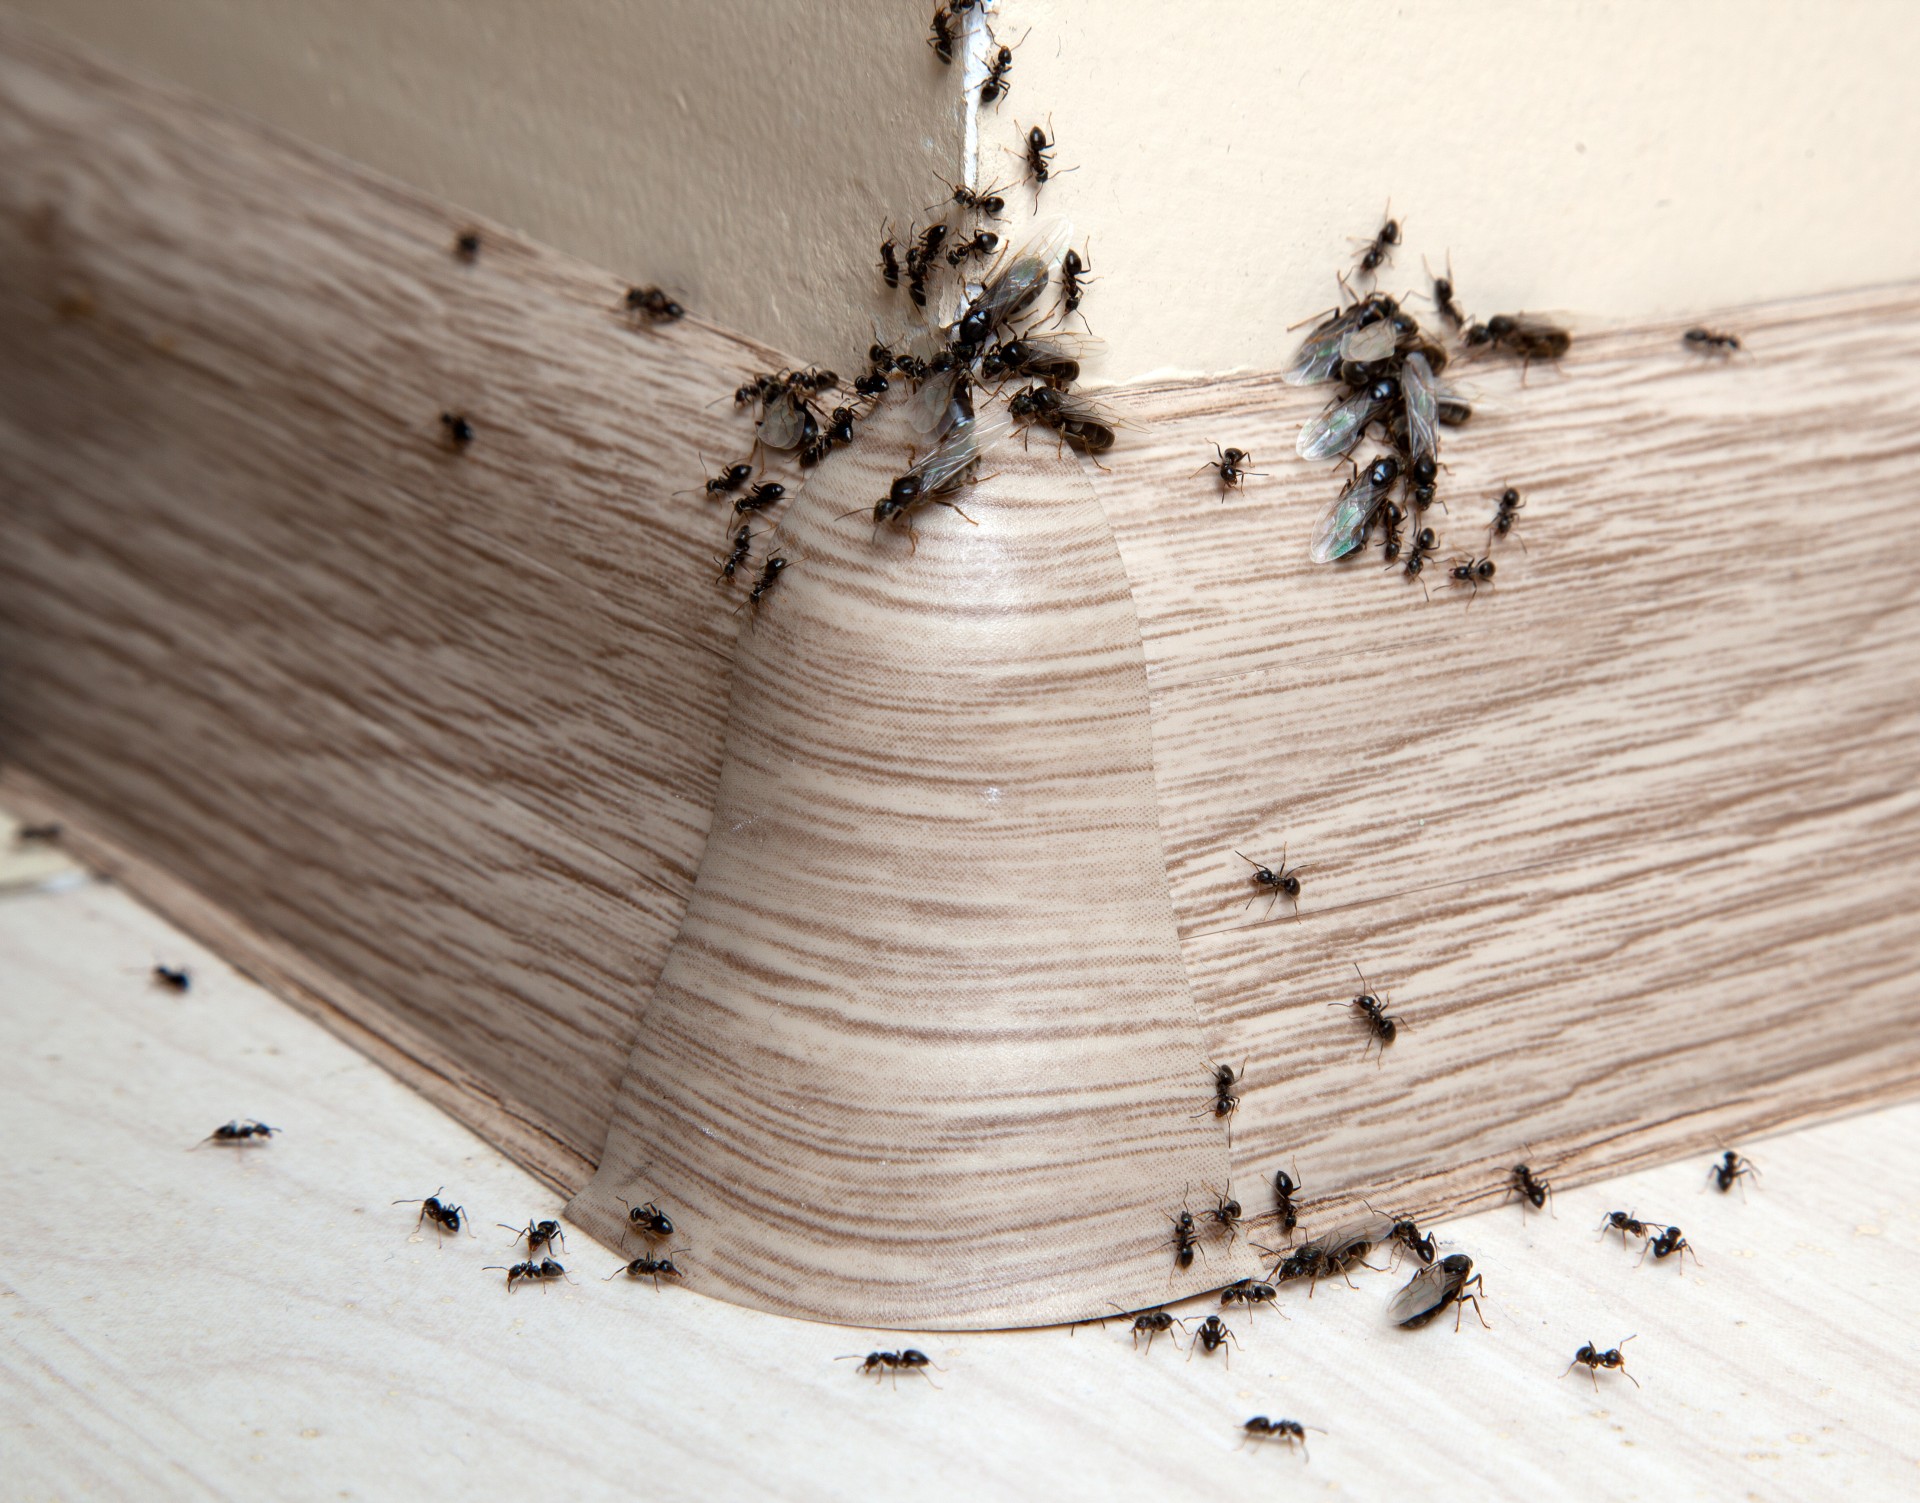 Ant Infestation, Pest Control in Staines-upon-Thames, Egham Hythe, TW18. Call Now 020 8166 9746